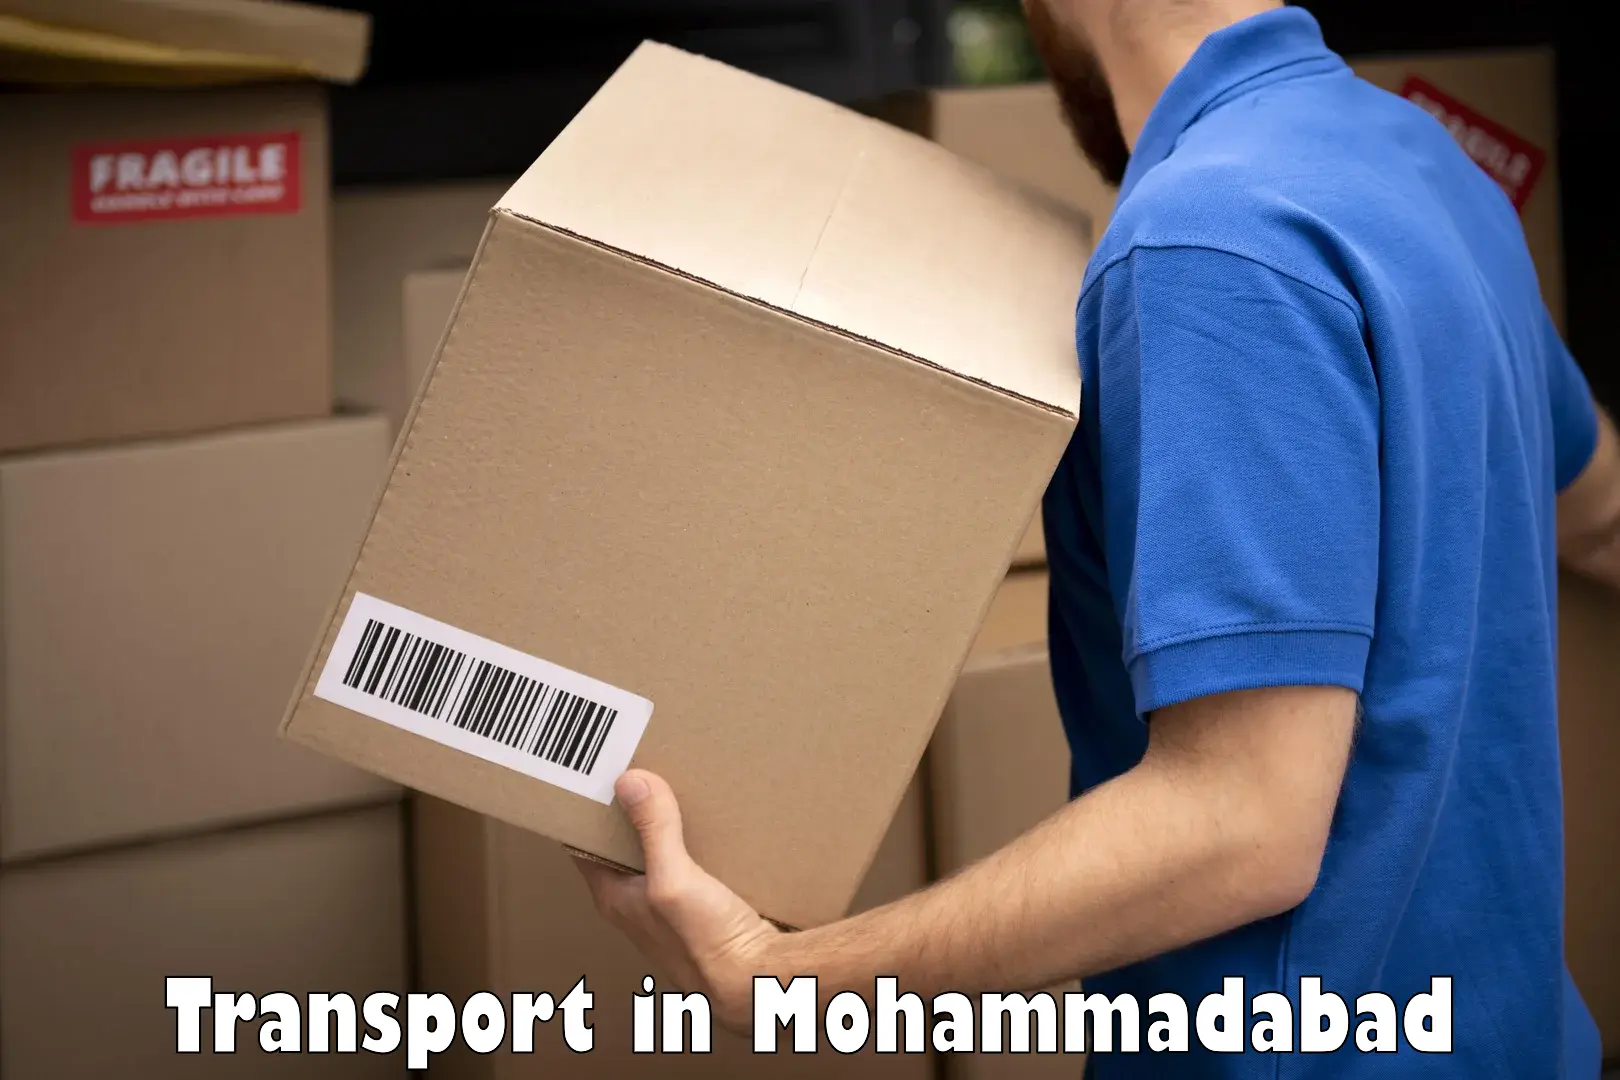 Domestic goods transportation services in Mohammadabad